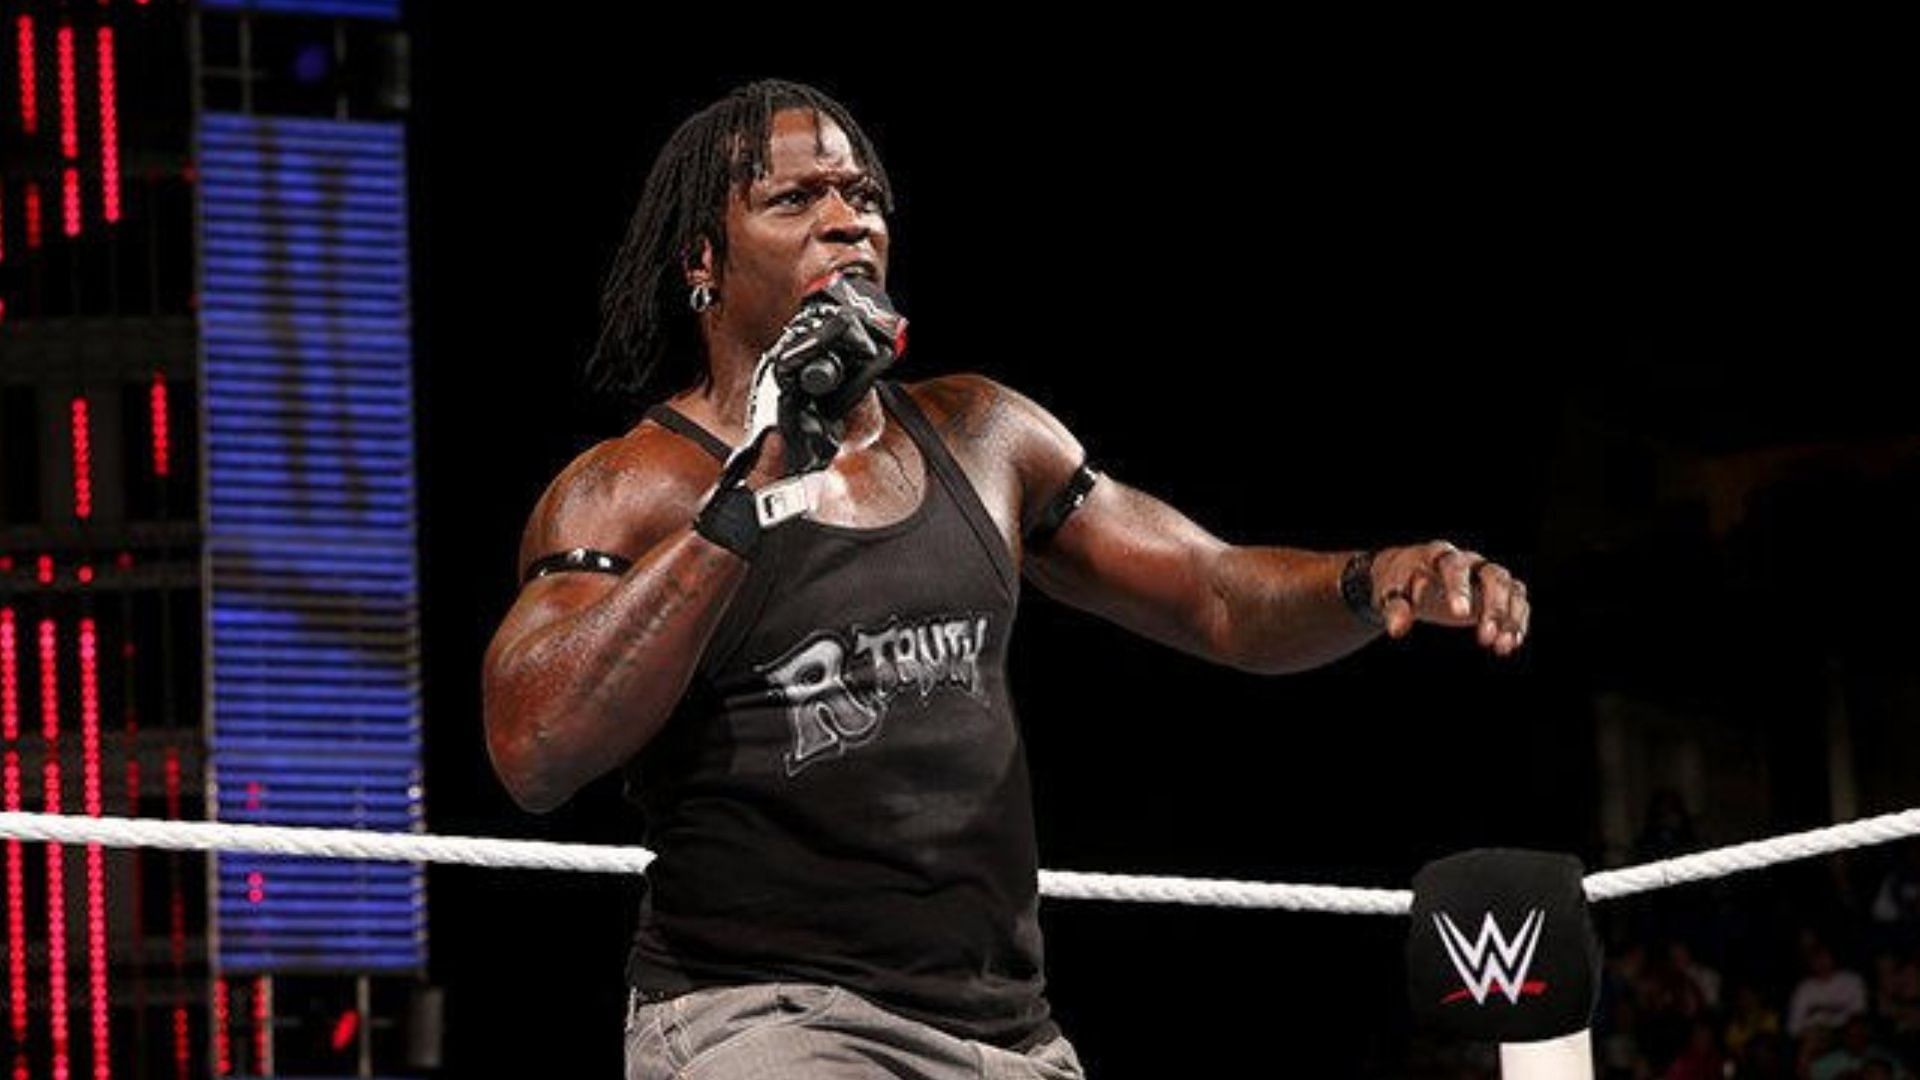 R-Truth questions the PG rating of the female wrestler